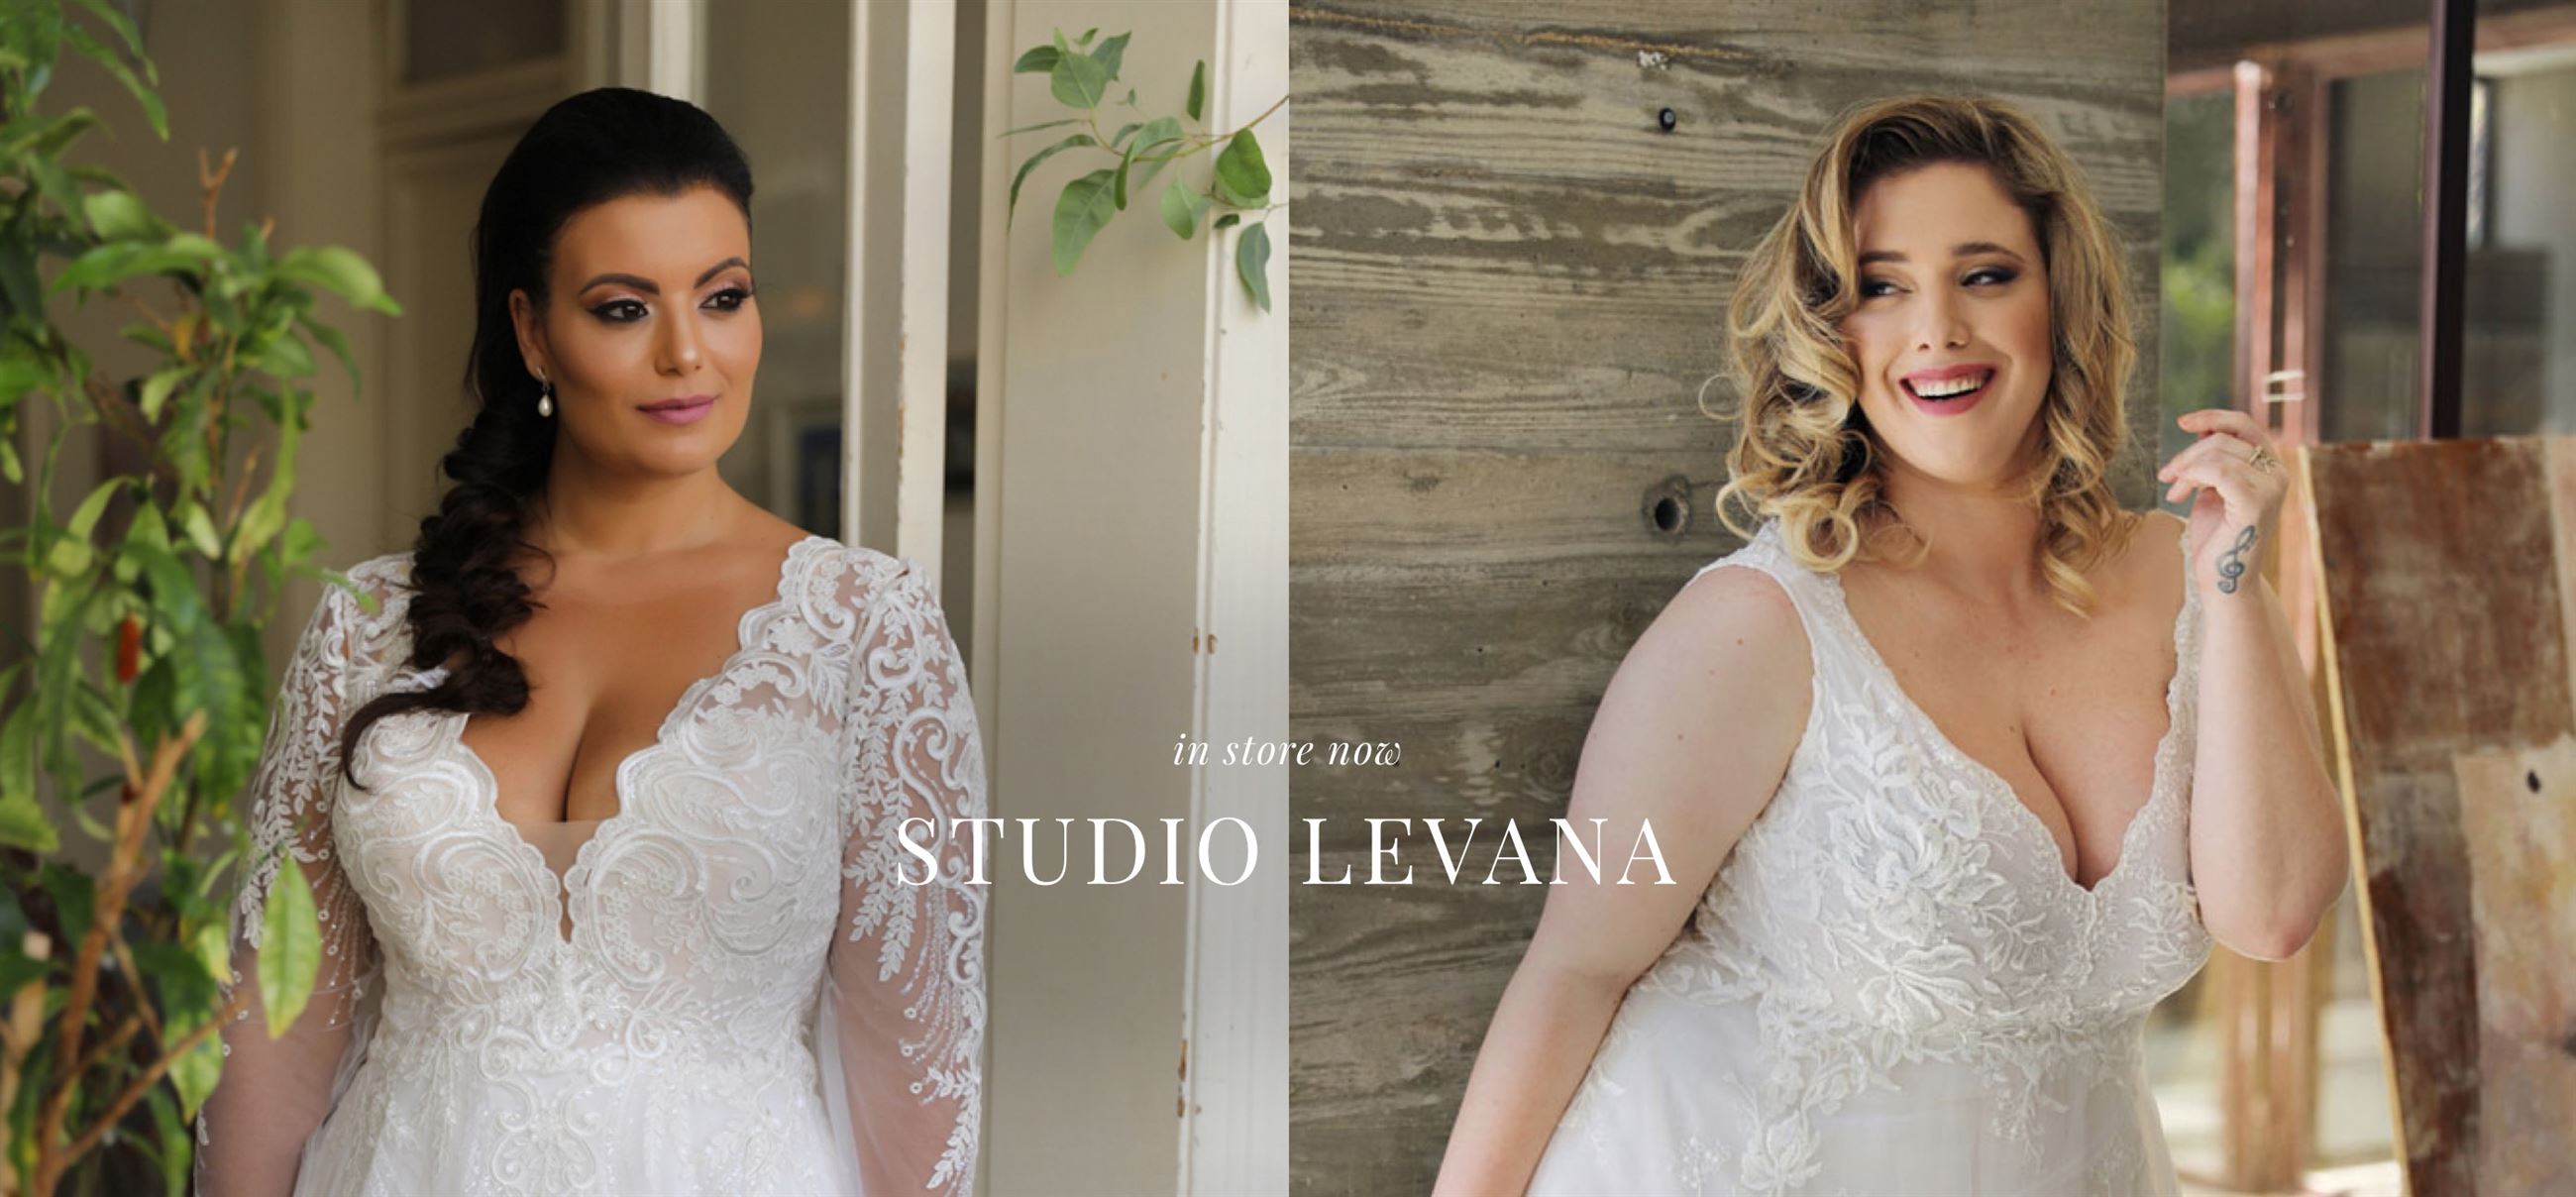 Della Curva Has The Best Selection Of Plus Size Wedding Dresses In Los Angeles California